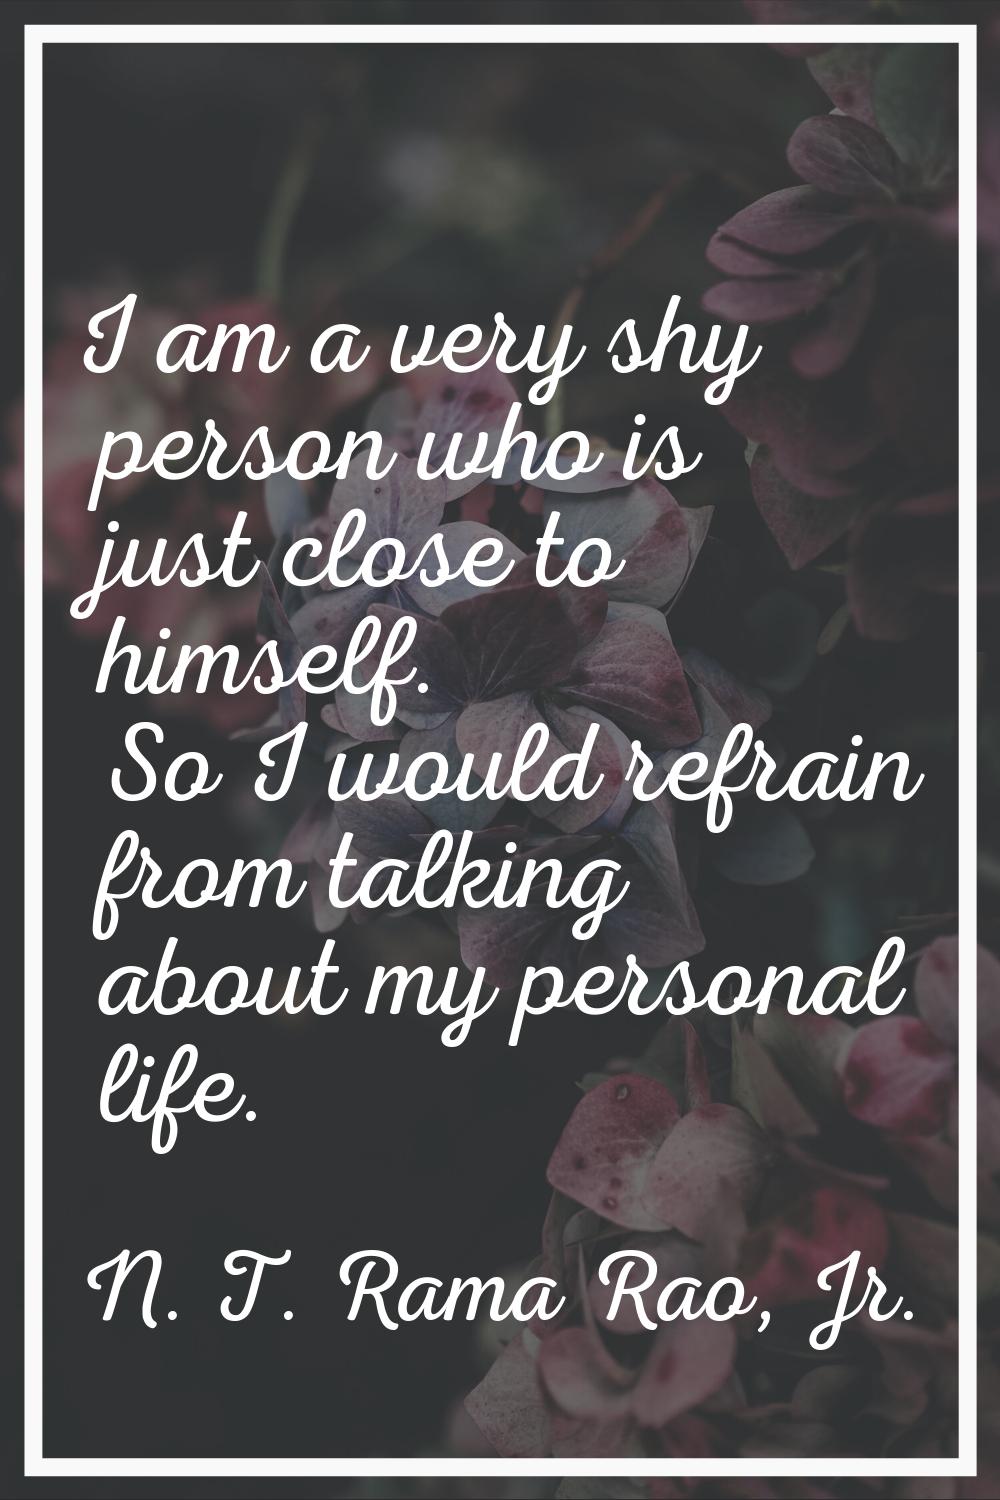 I am a very shy person who is just close to himself. So I would refrain from talking about my perso